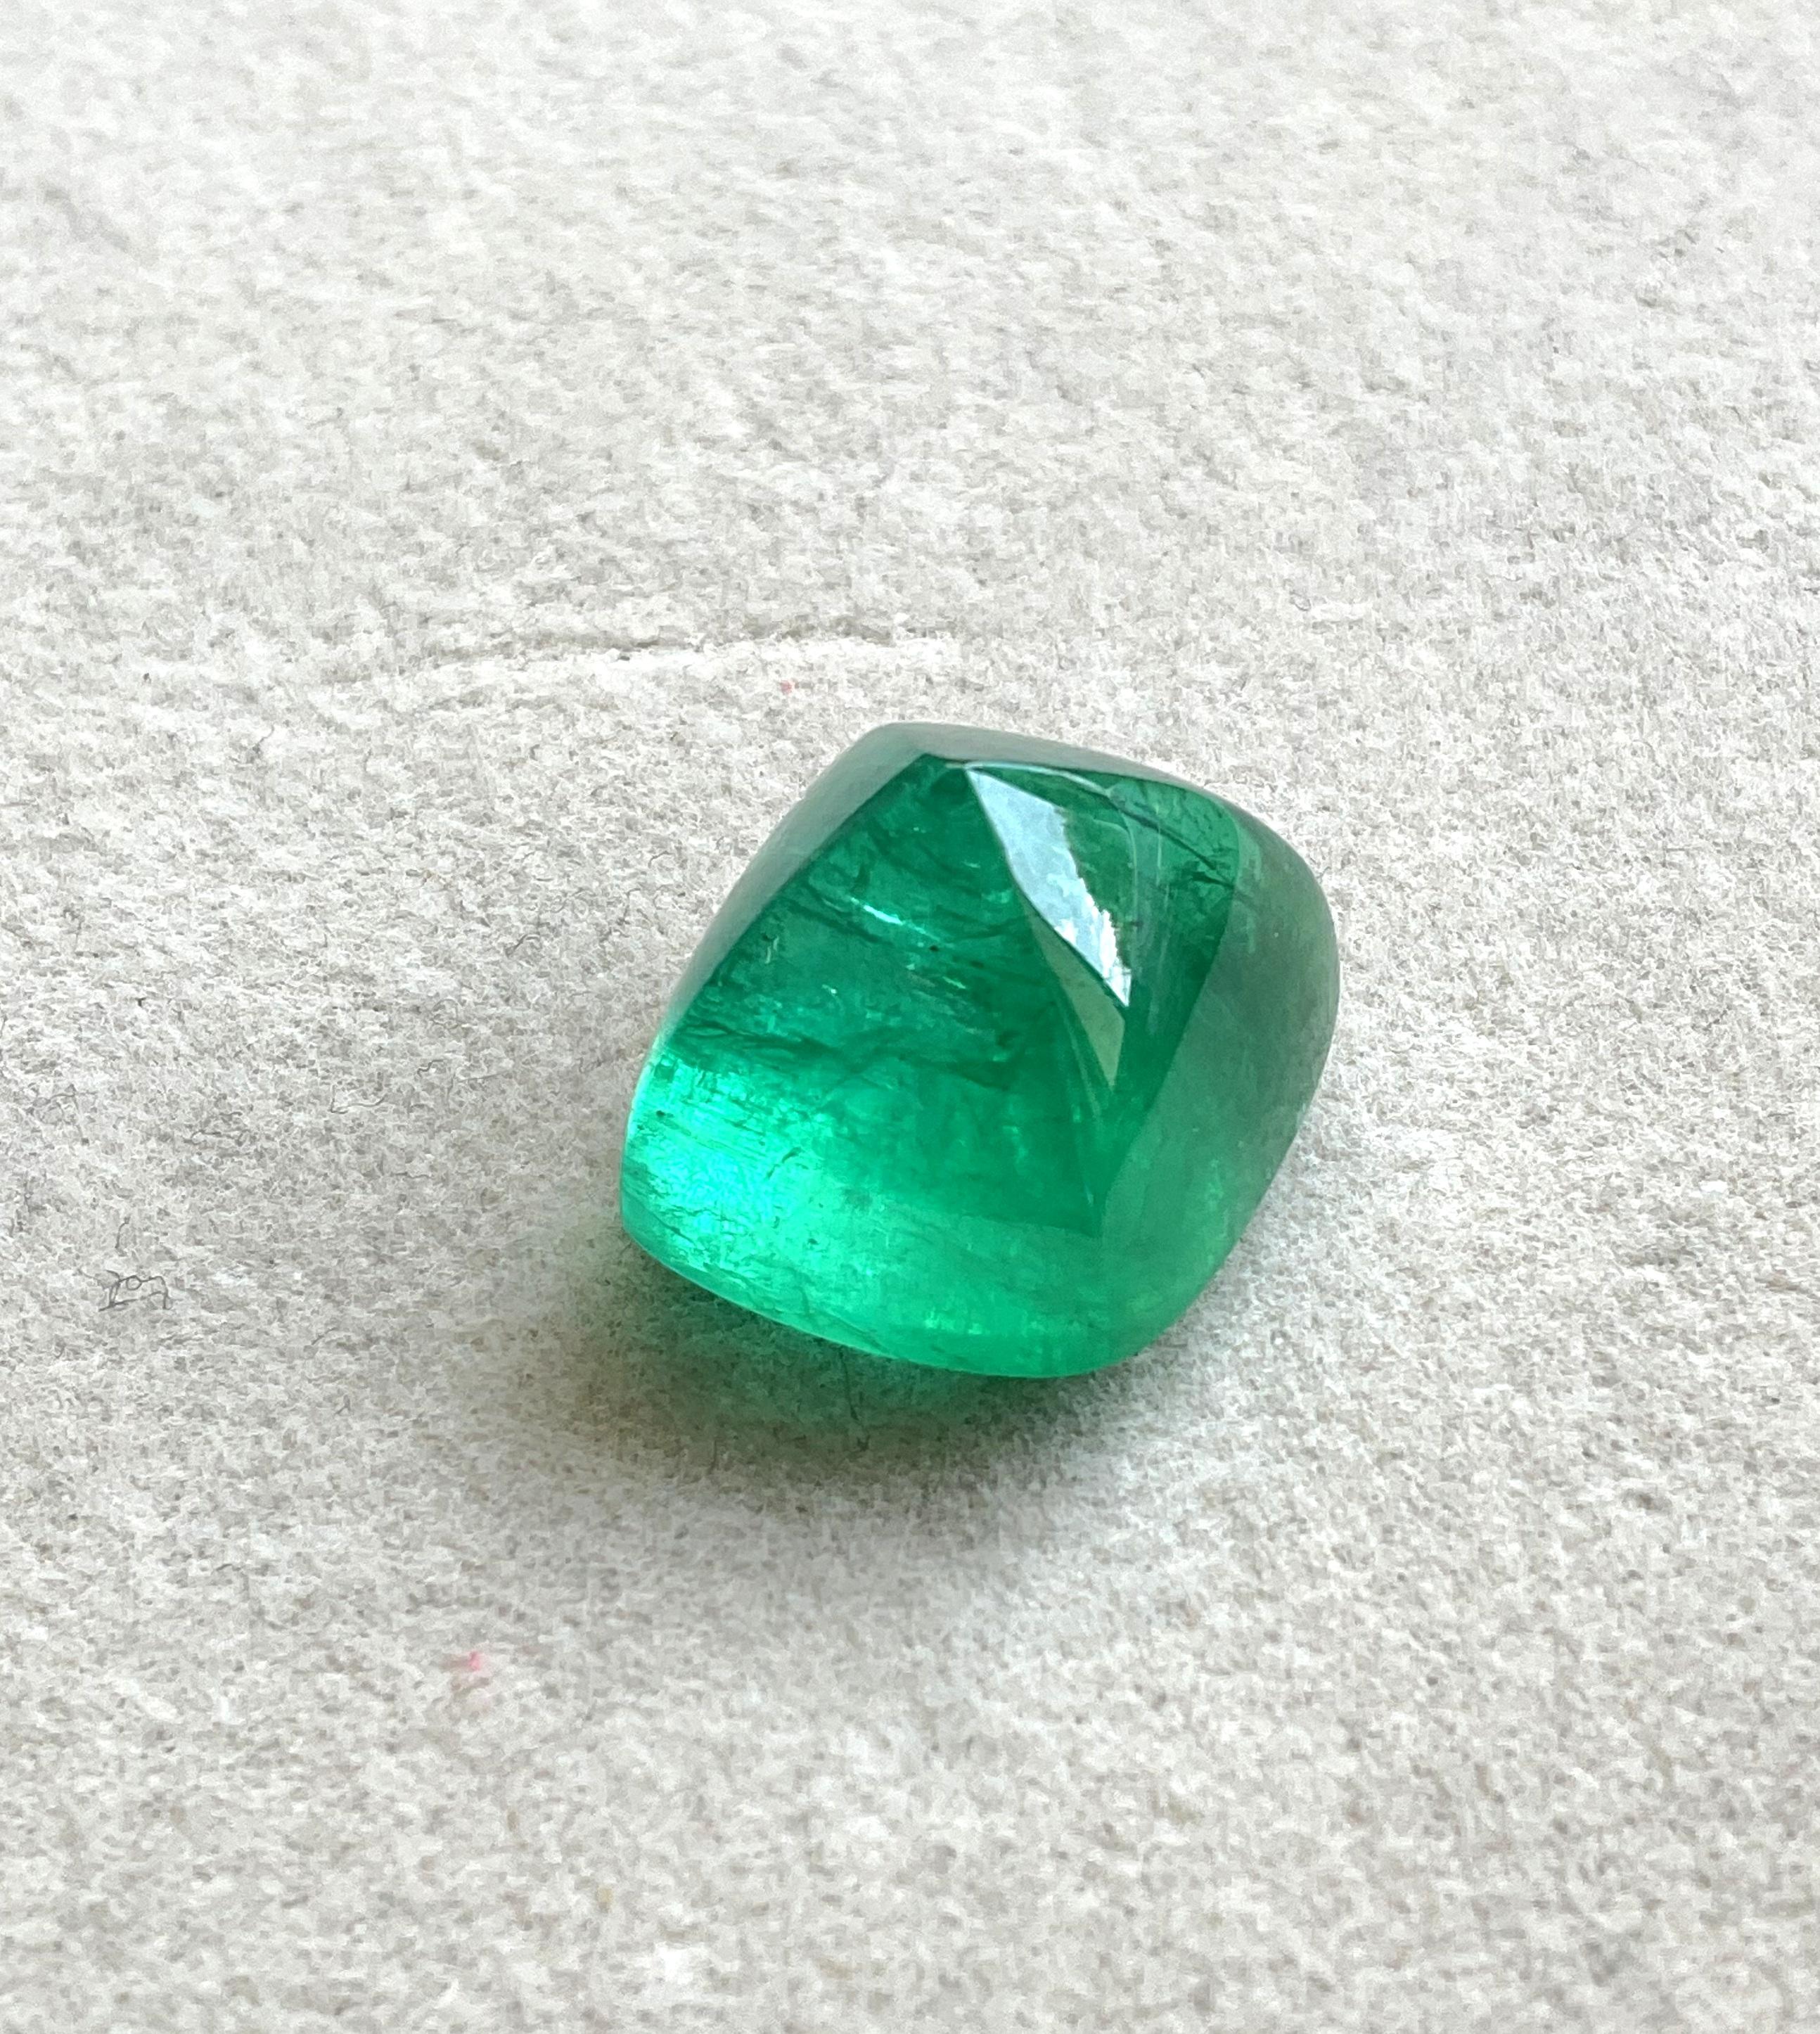 Certified 25.38 Cts Zambian Emerald Sugarloaf Cabochon Top Quality Natural Gem For Sale 1